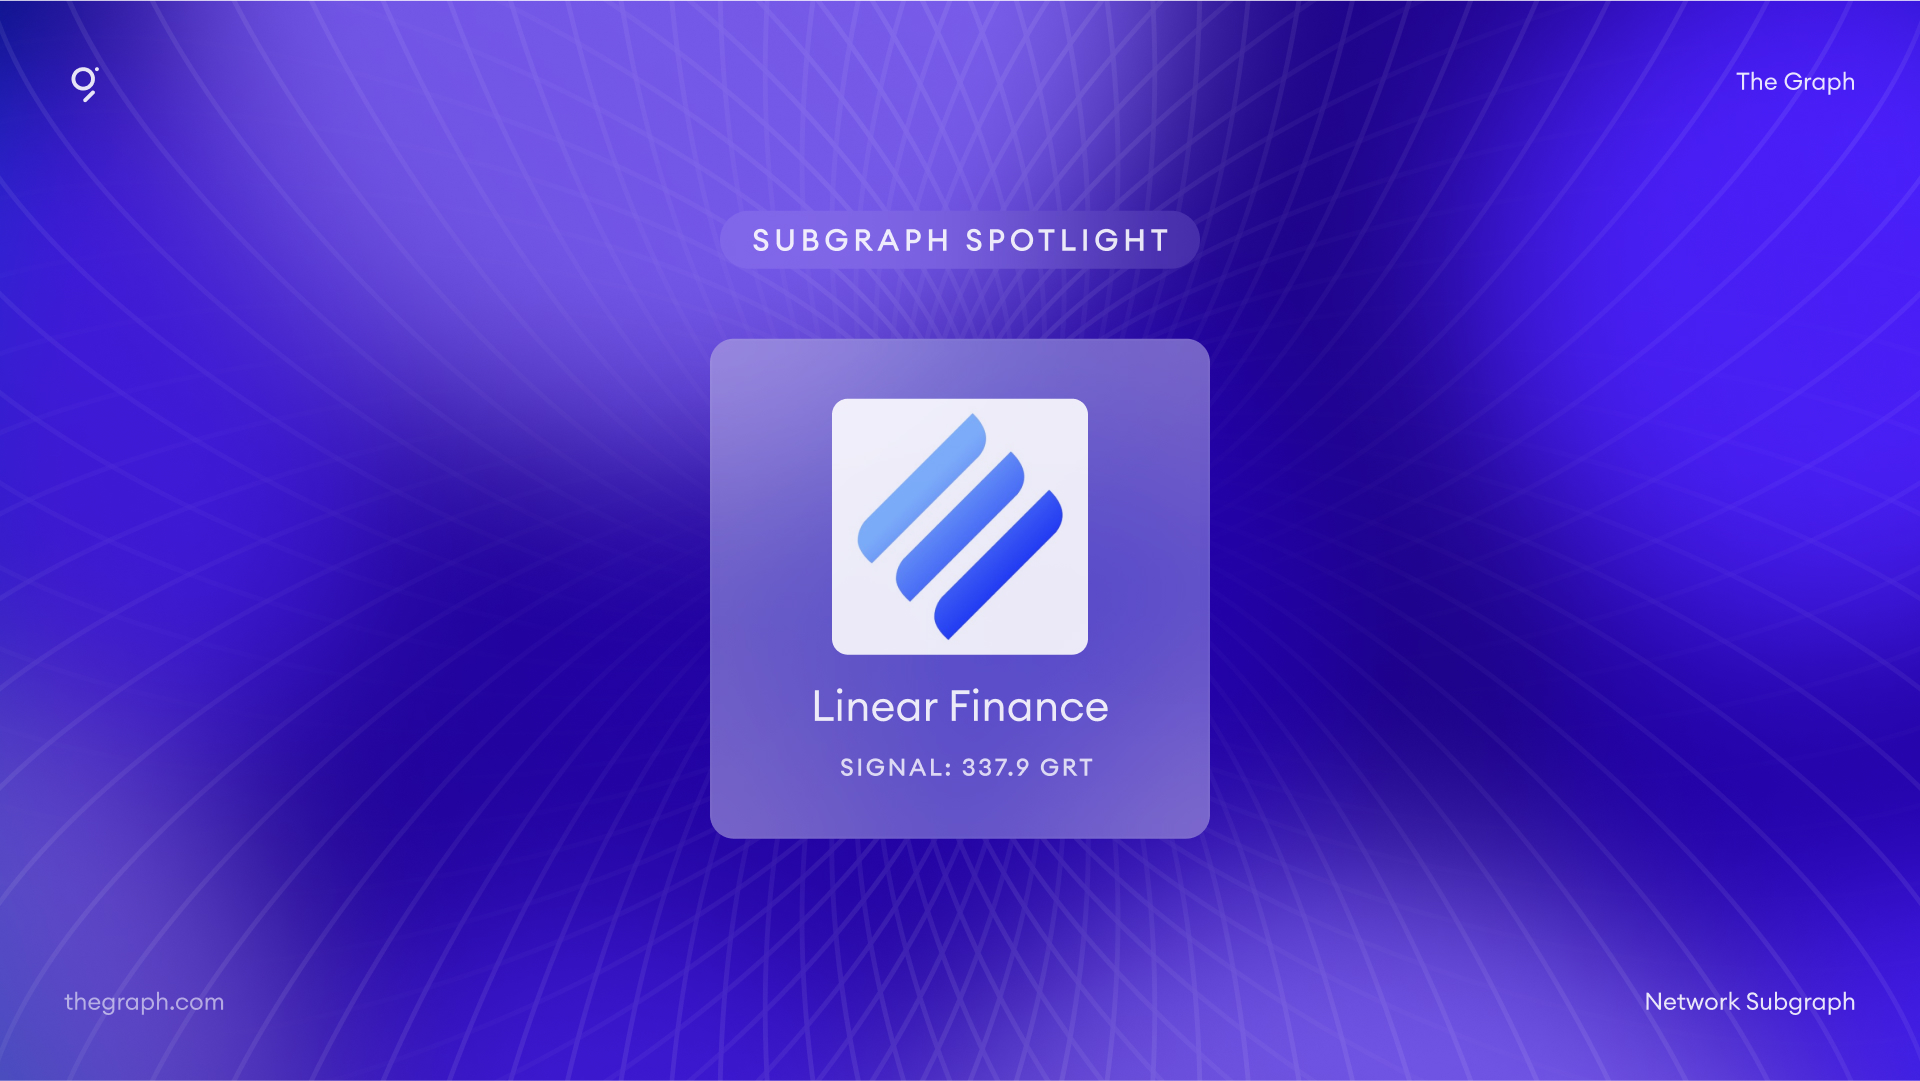 The mainnet subgraph for <a href=/currencies/linear>@LinearFinance</a> is now live on The Graph’s decentralized network ...